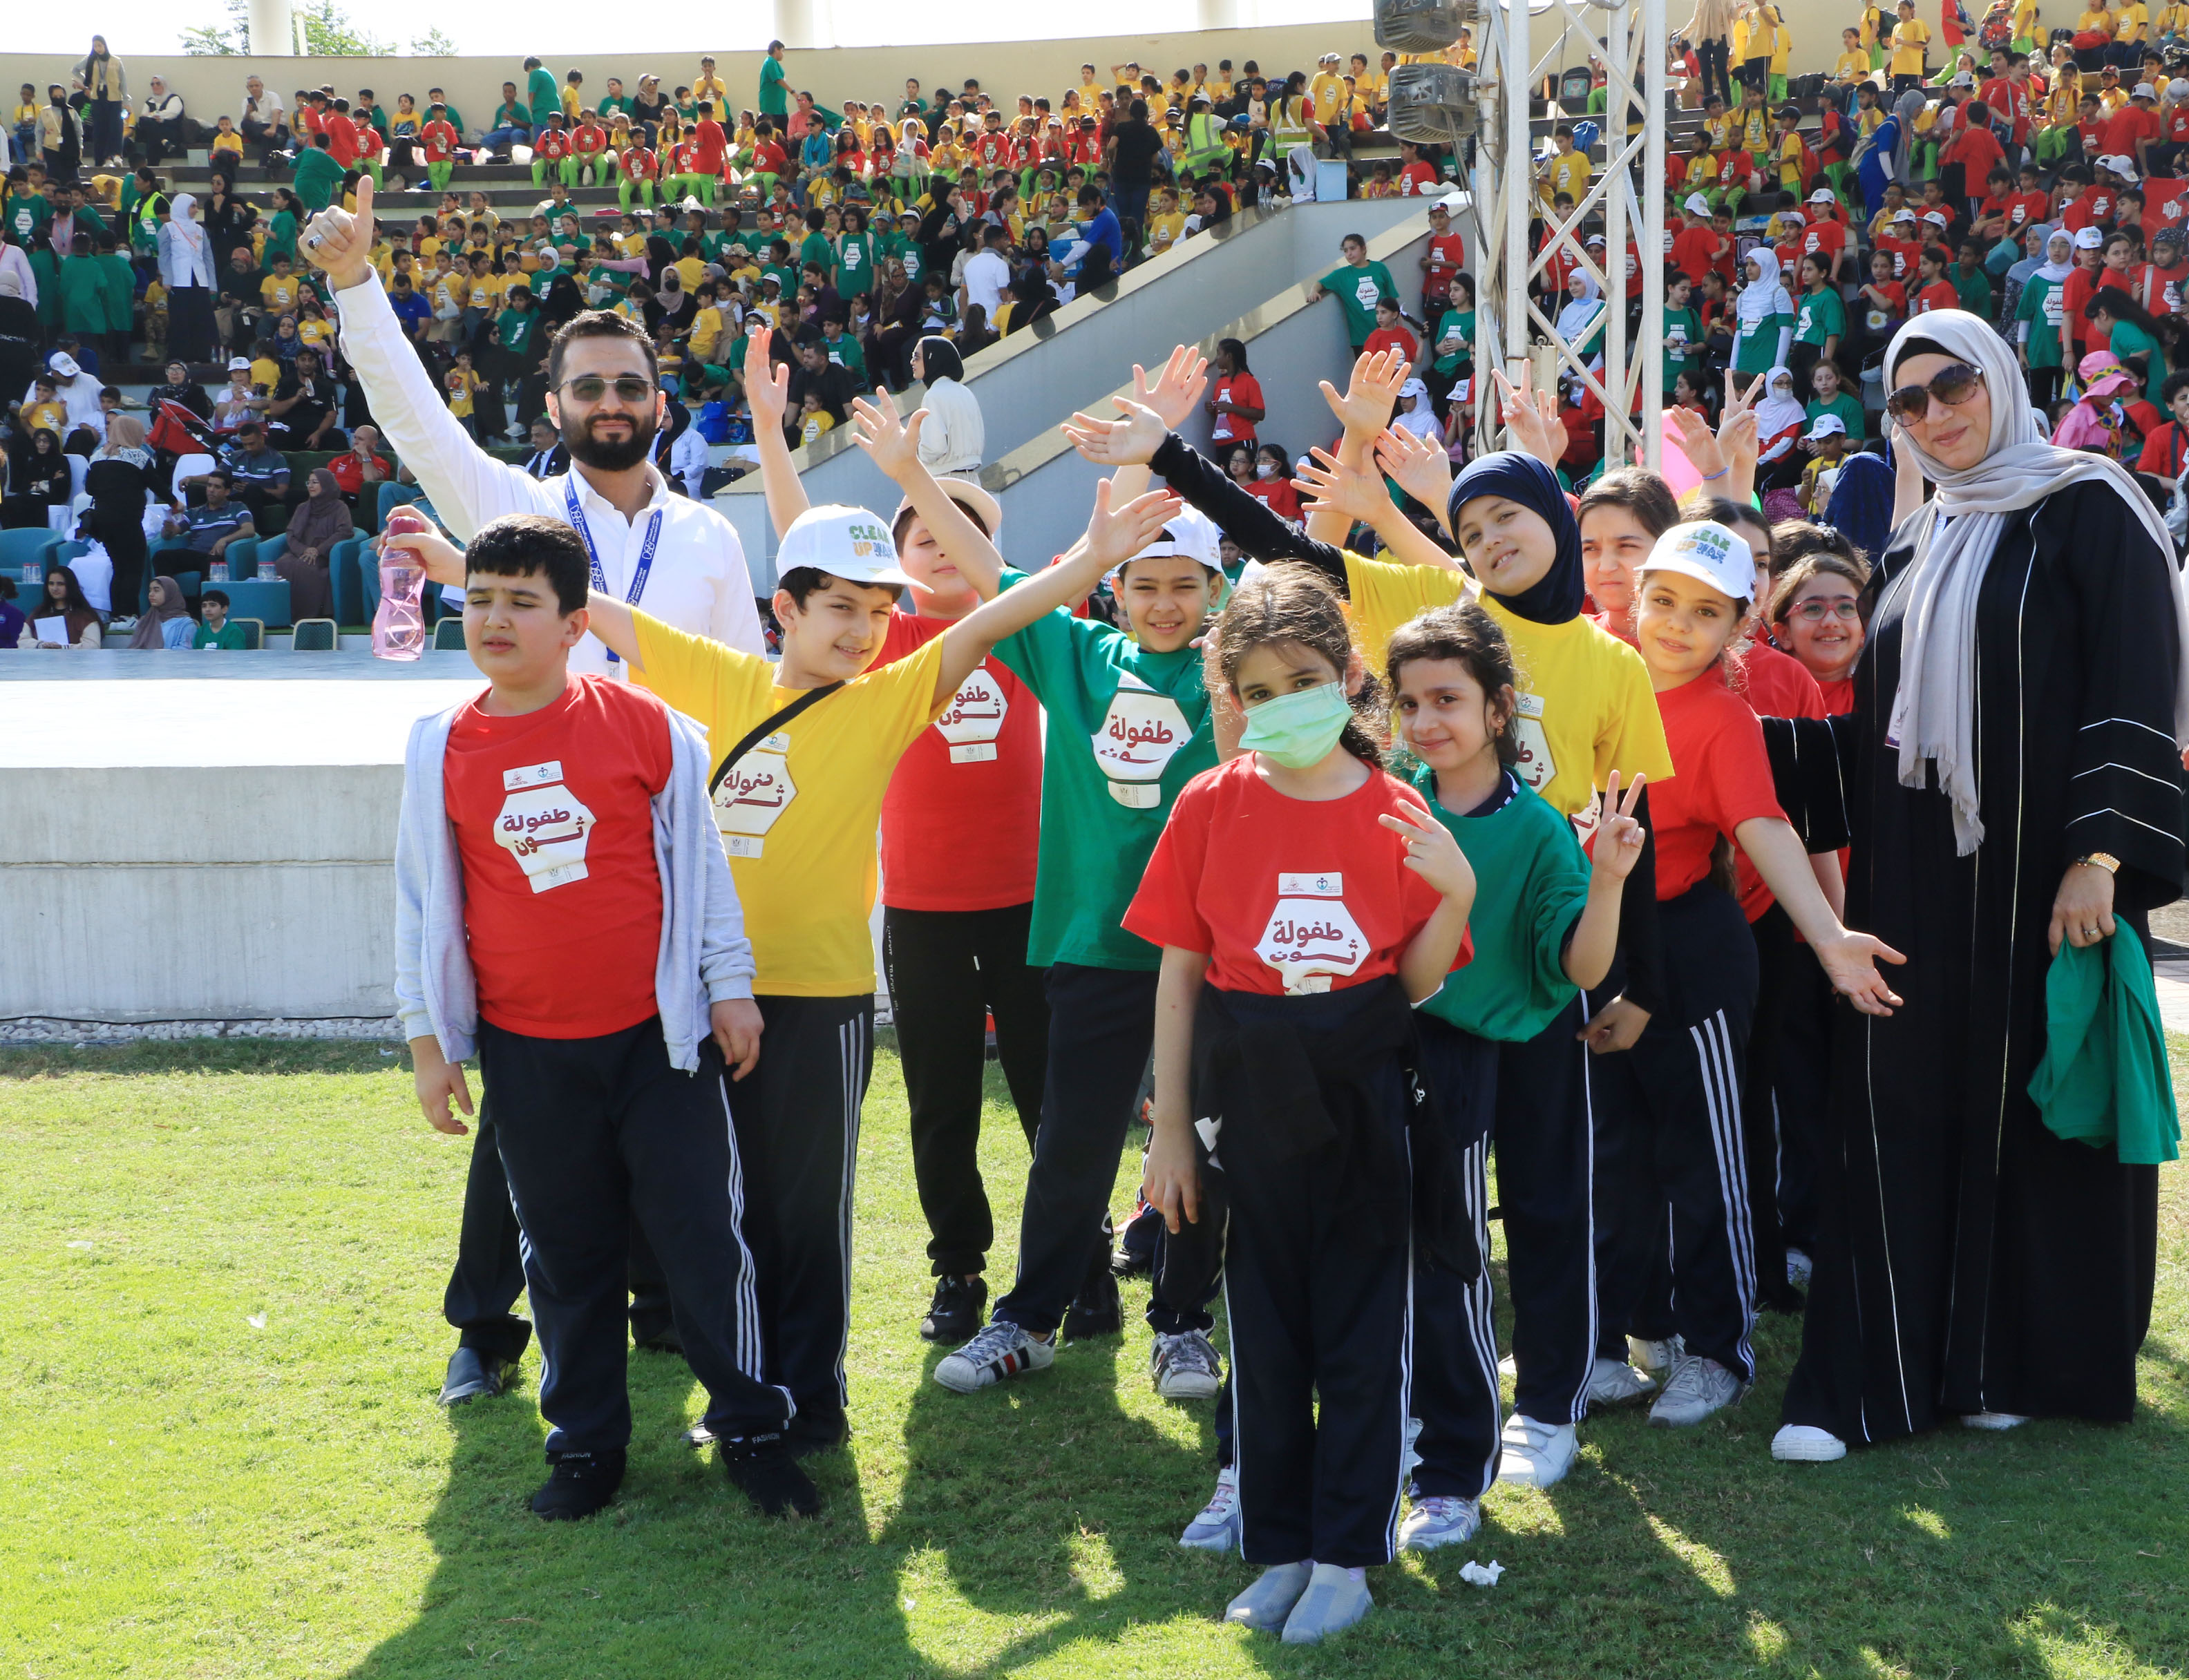 2500 MALE AND FEMALE STUDENTS PARTICIPATE IN (CHILDHOOD THON 4)